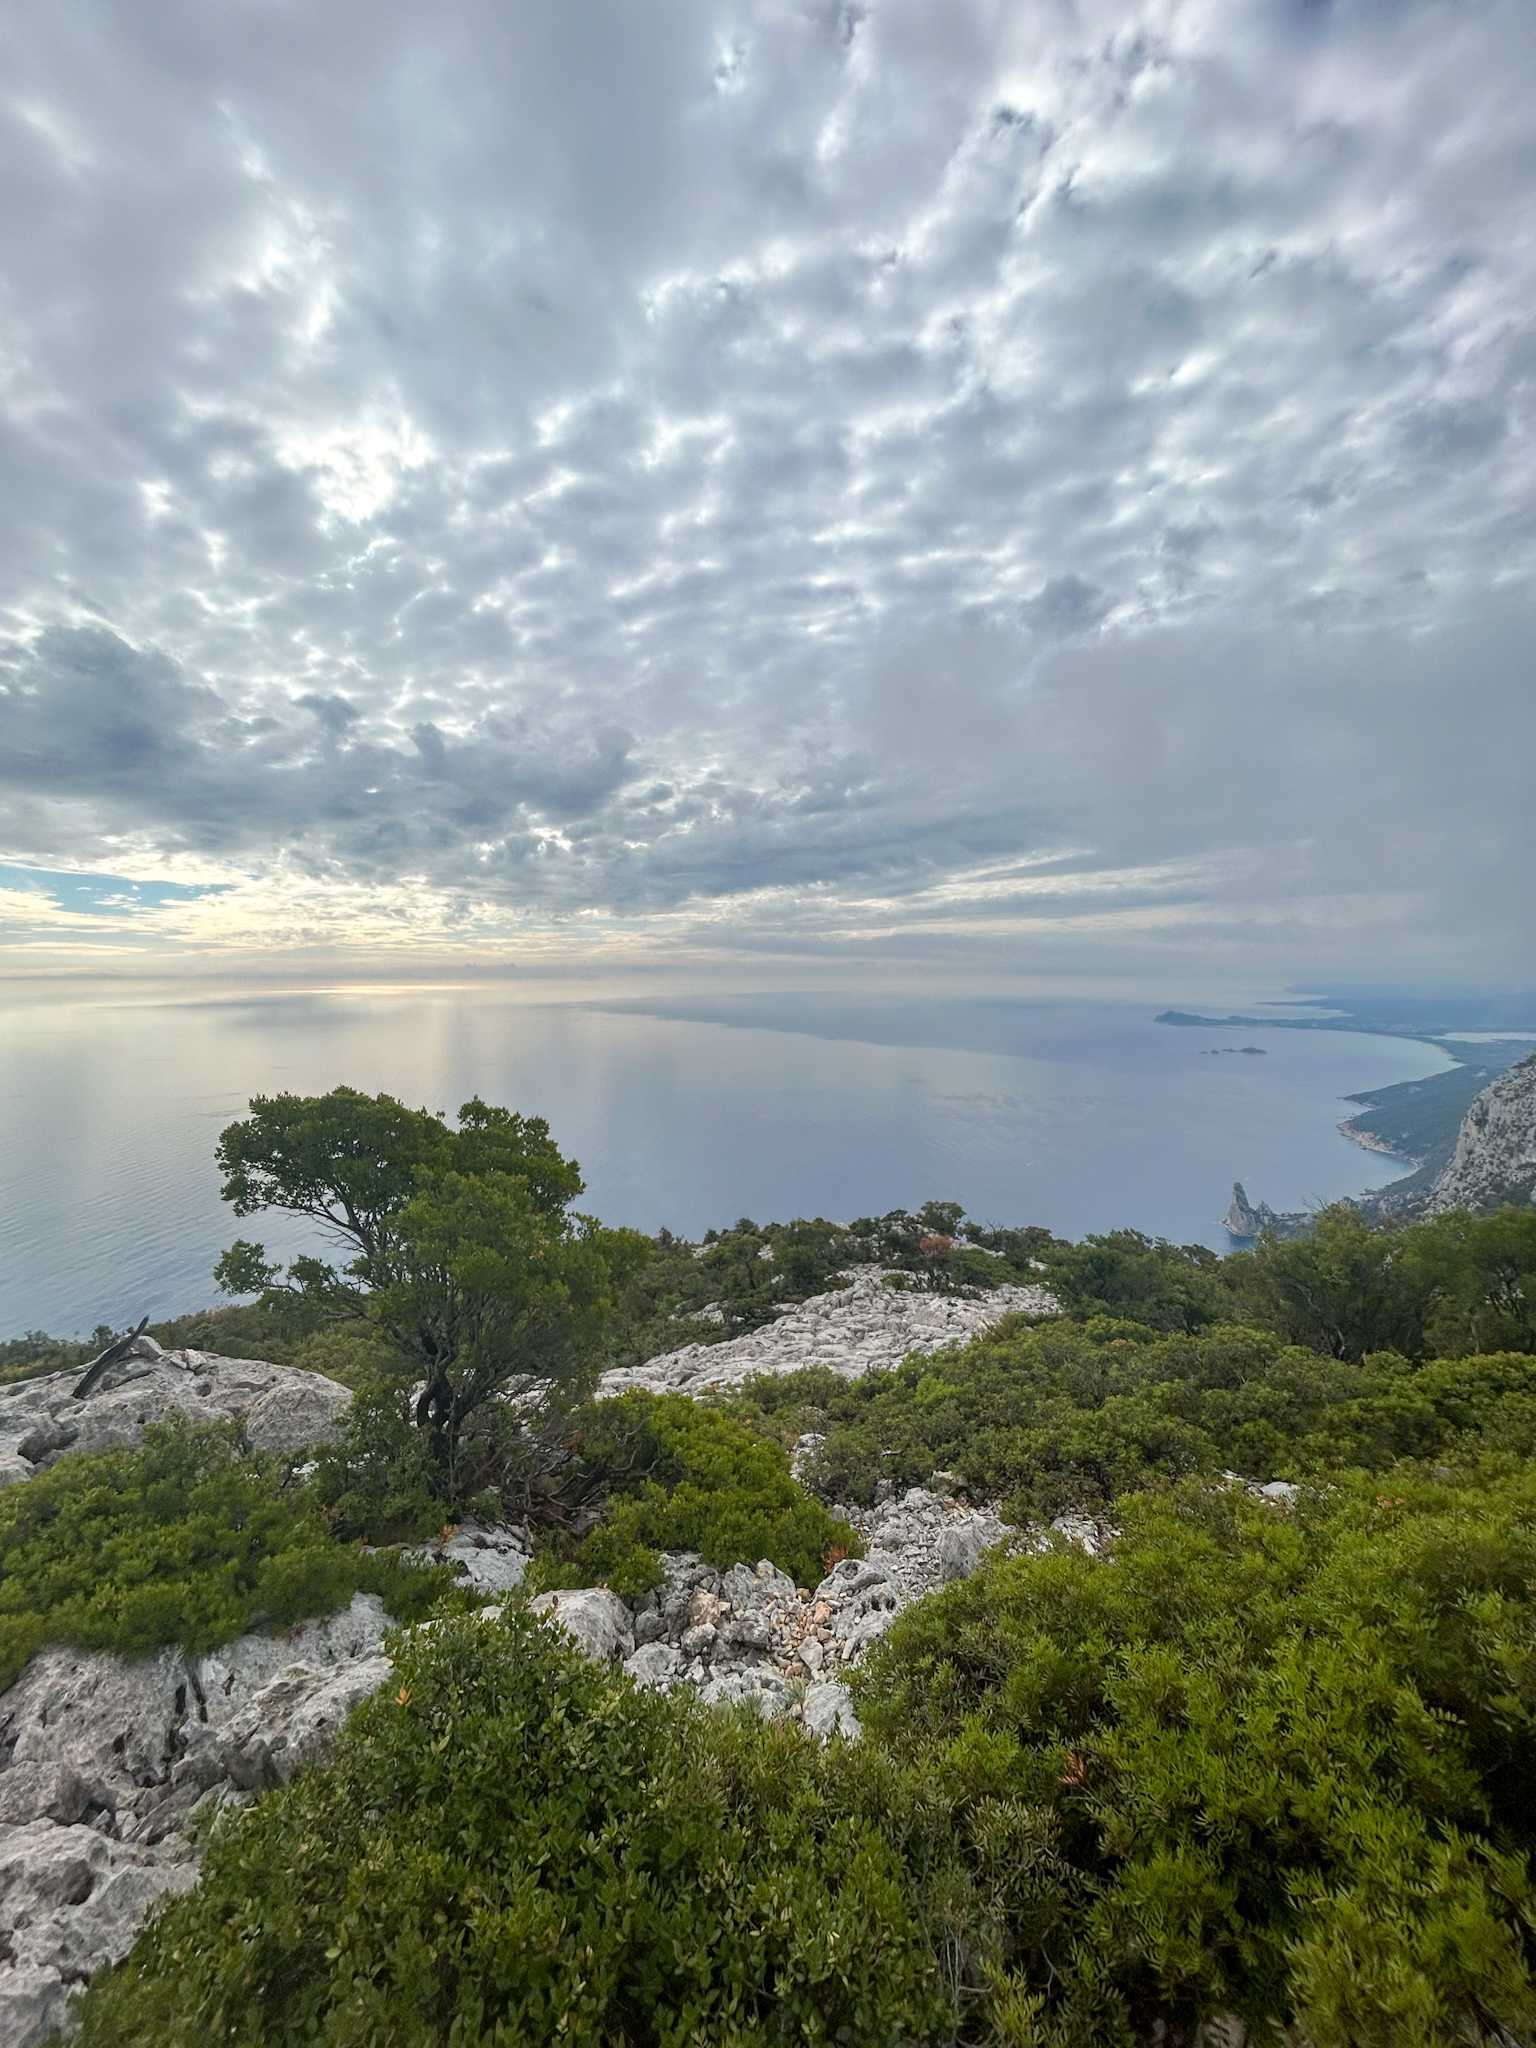 Dramatic clouds over the coastline of Sardinia, viewed from the clifftop.